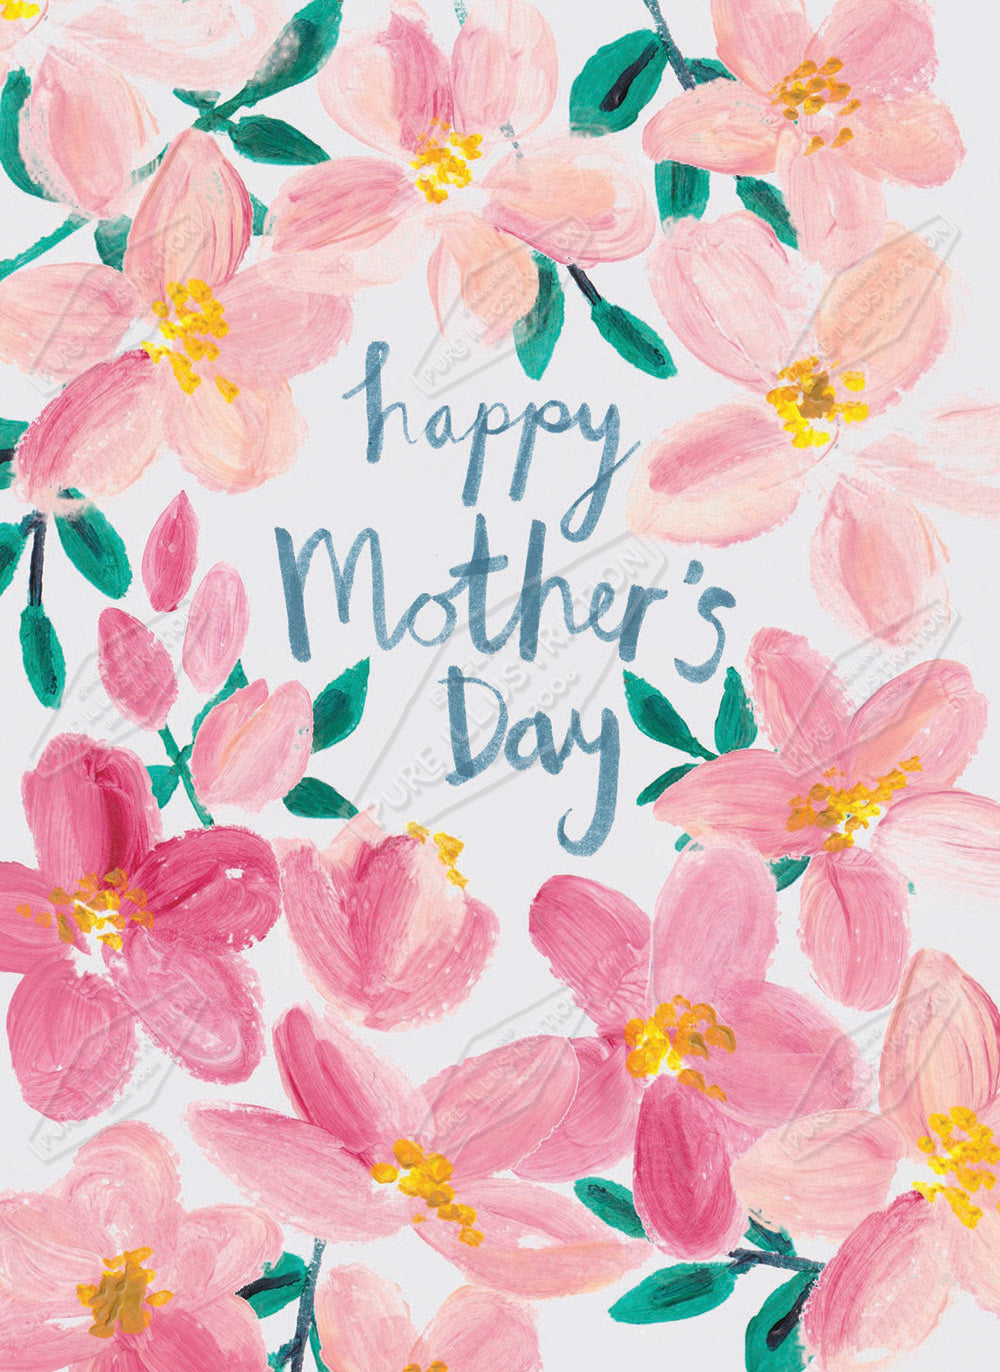 00033903SLA- Sarah Lake is represented by Pure Art Licensing Agency - Mother's Day Greeting Card Design